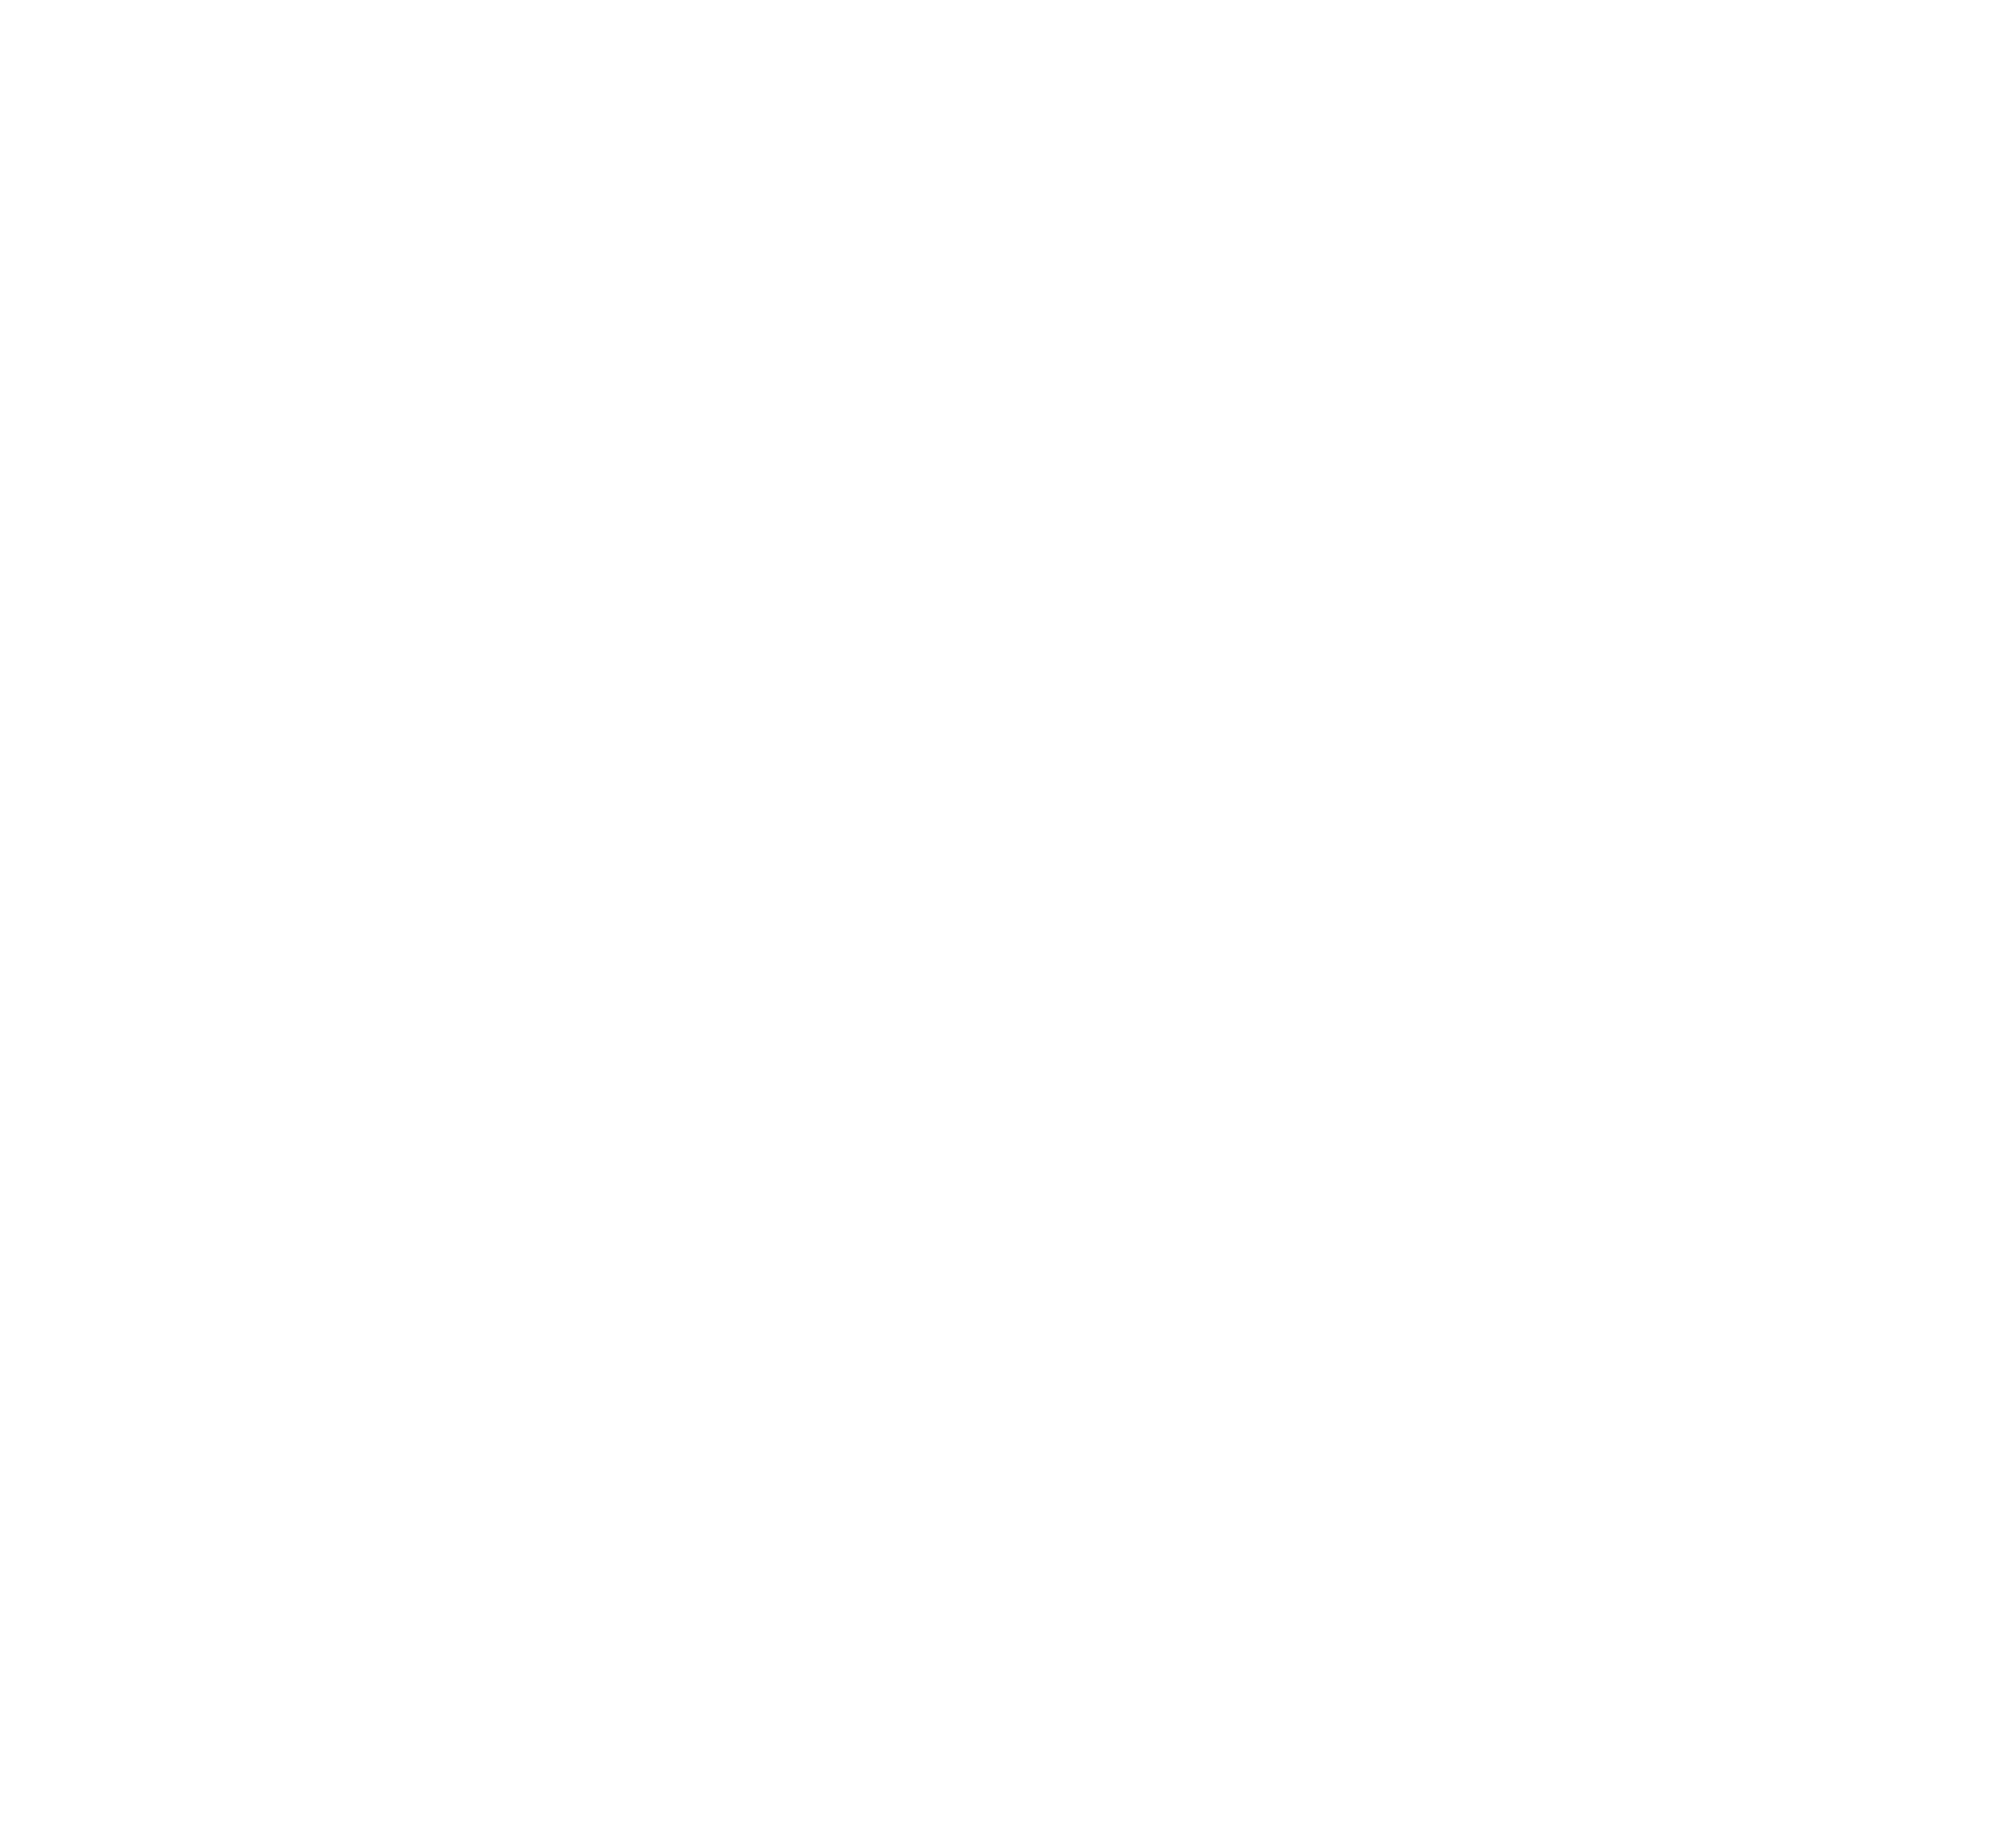 holiday-specials-french-press-bakery-cafe